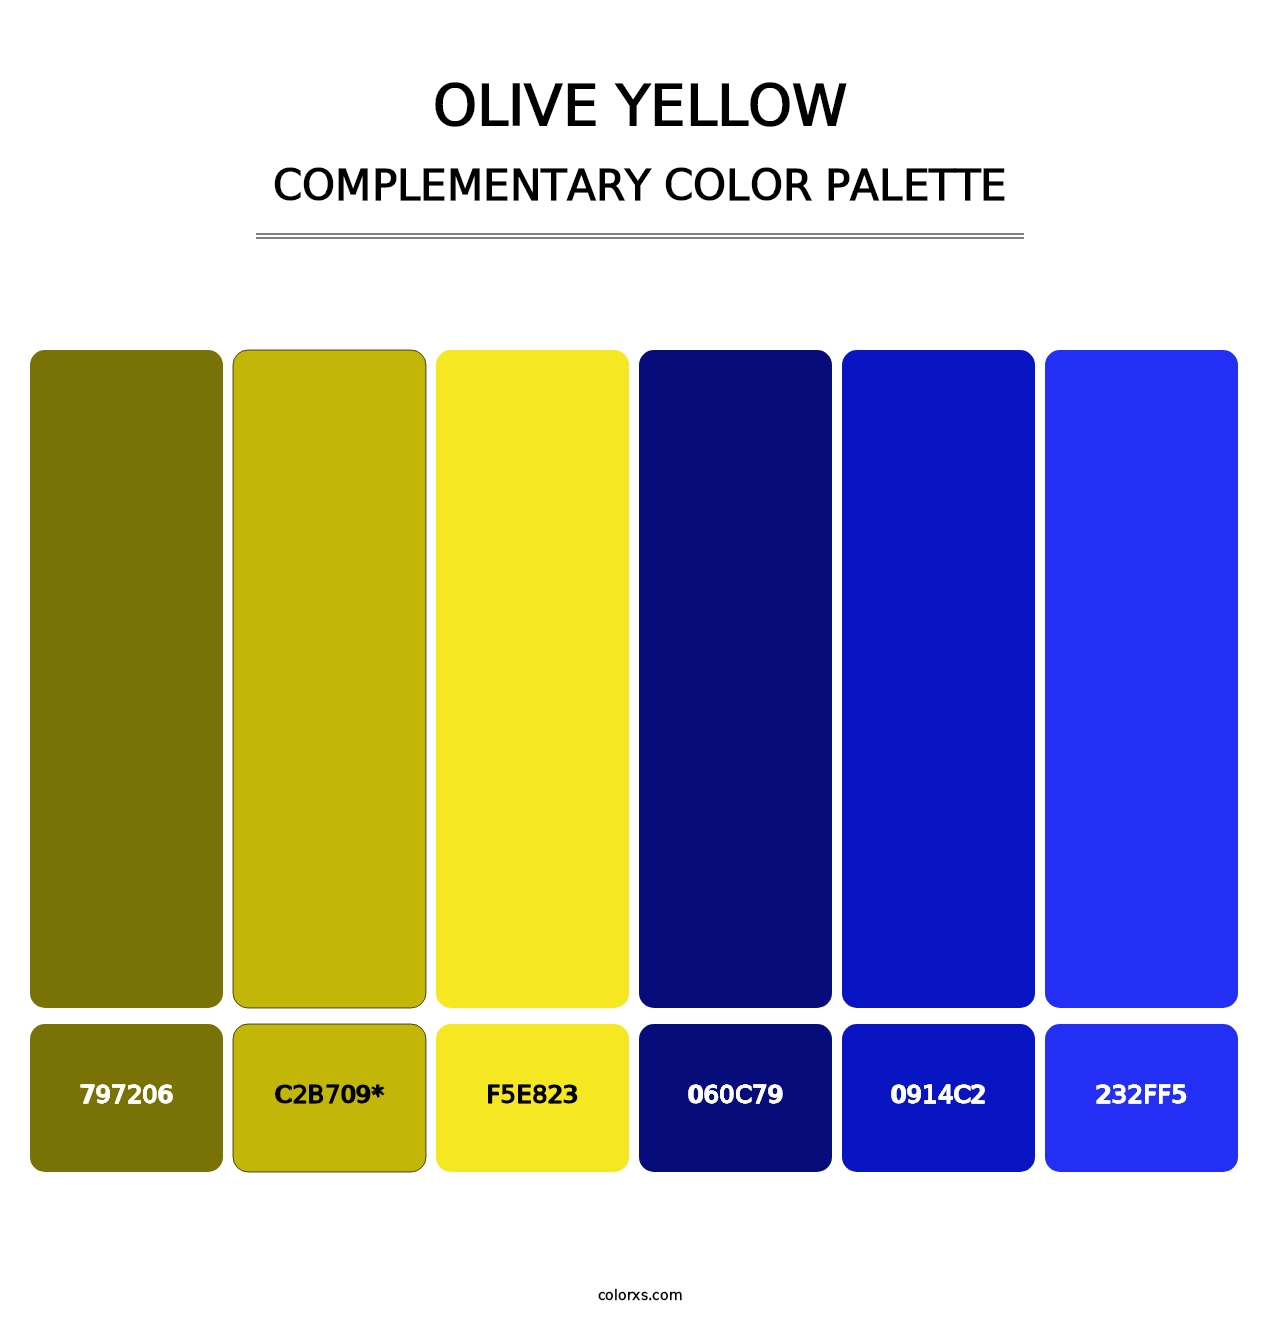 Olive Yellow - Complementary Color Palette